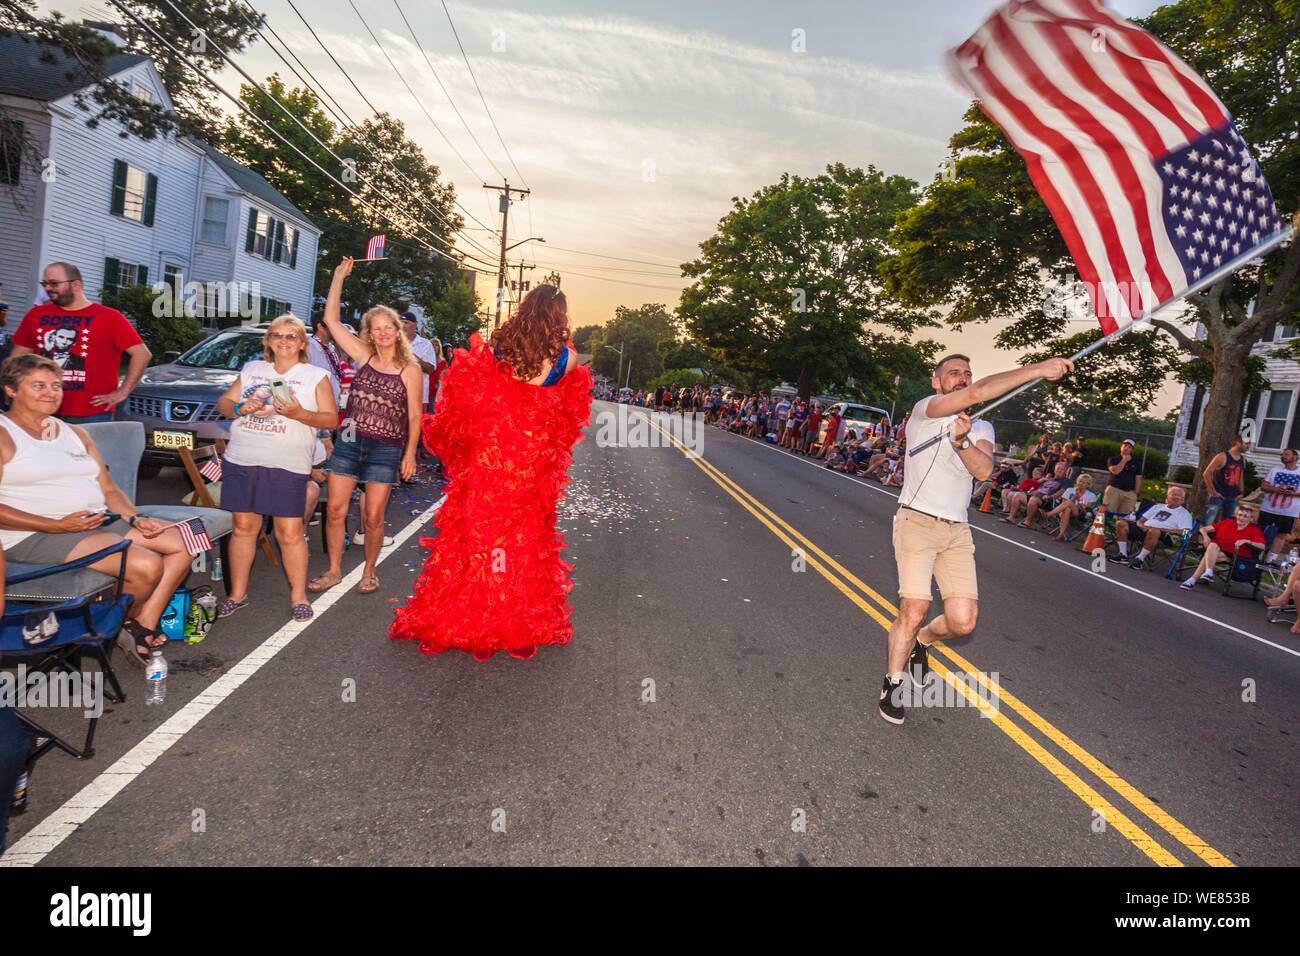 United States, New England, Massachusetts, Cape Ann, Gloucester, Gloucester Horribles Traditional Parade, July 3, man marching with US flag Stock Photo